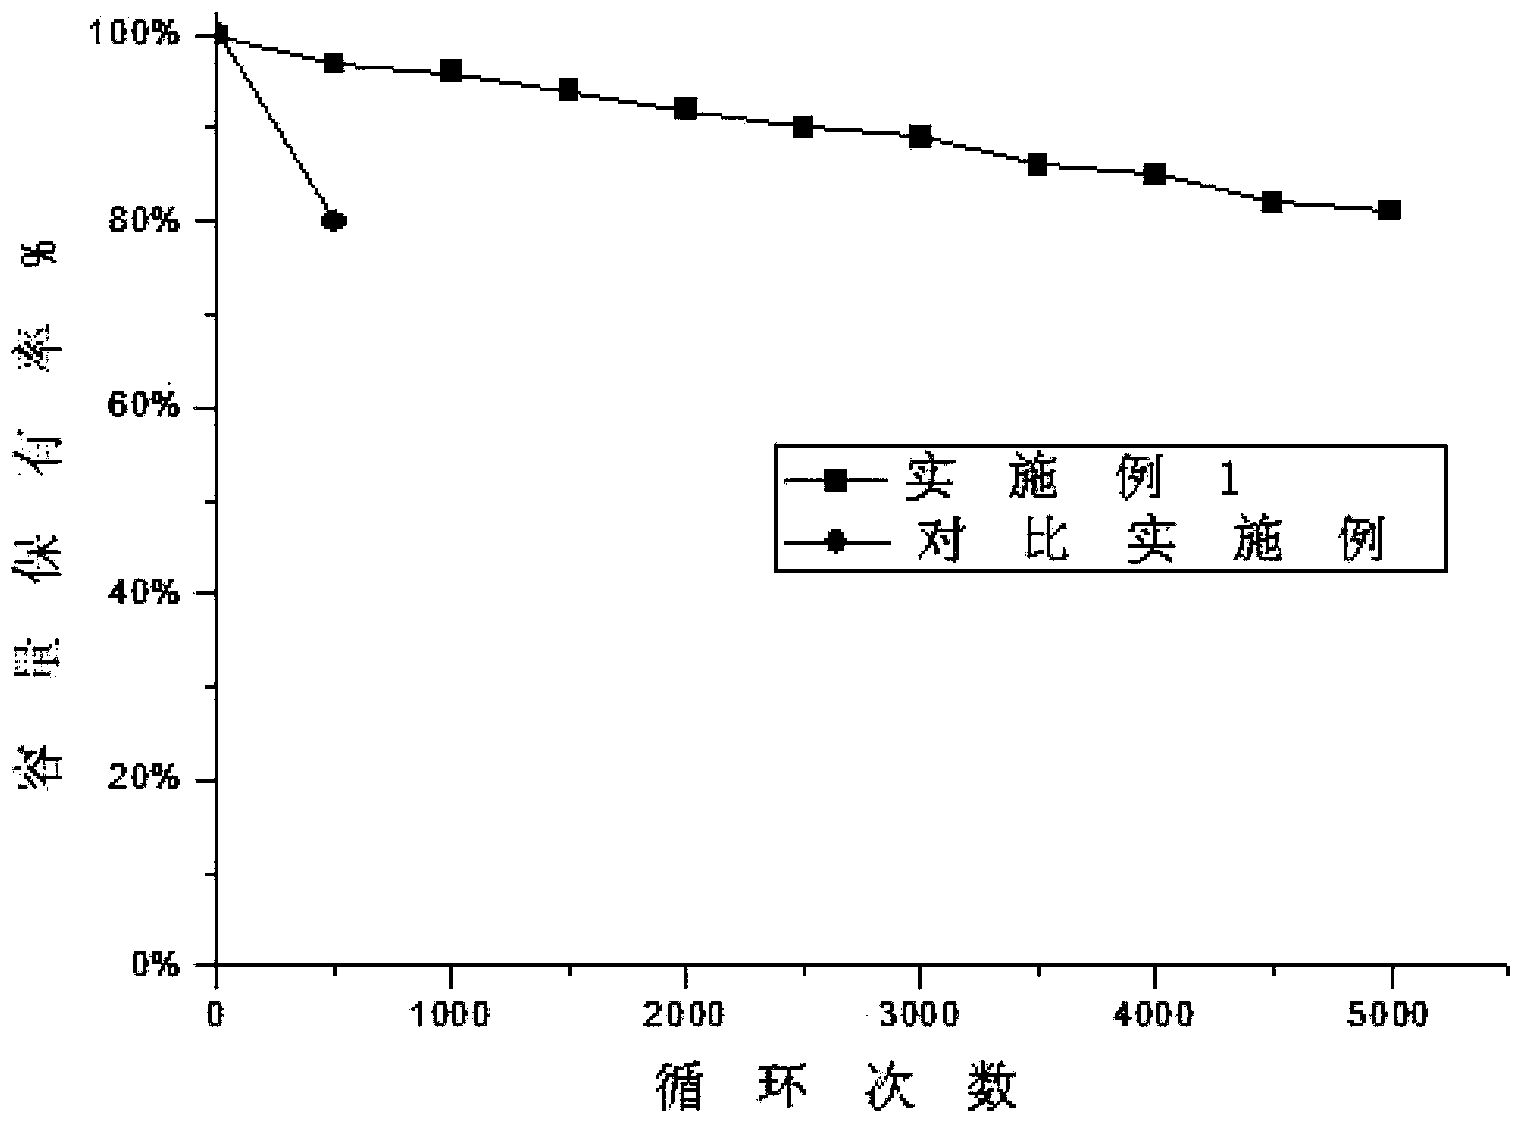 Graphene-bismuth oxide composite material as well as preparation method thereof, lead carbon battery cathode diachylon as well as preparation method thereof and lead carbon battery cathode plate